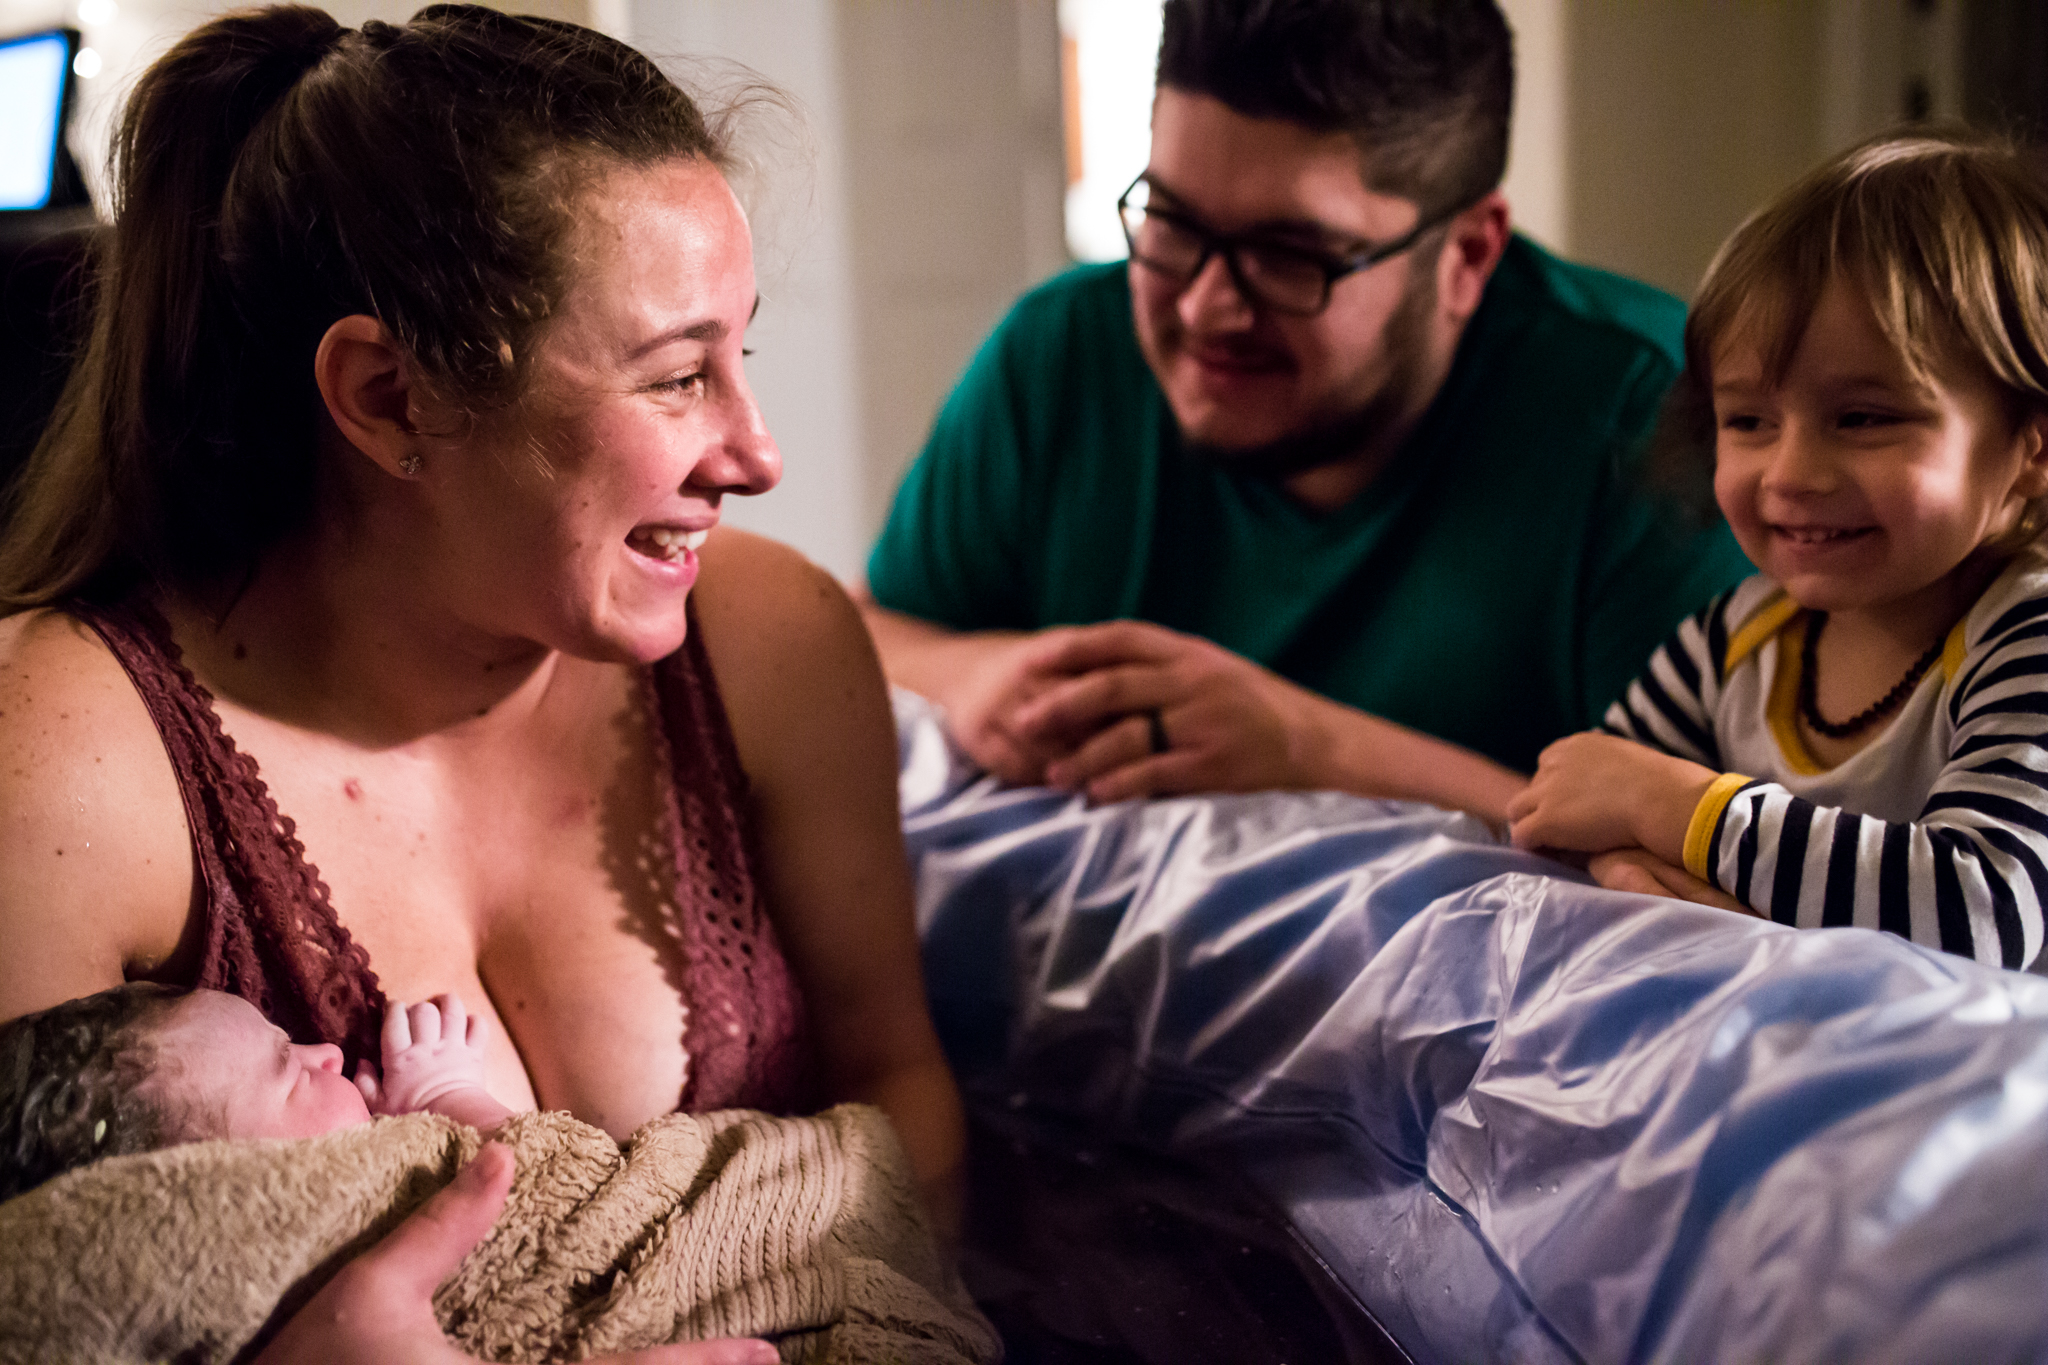 DFW Birth Photographer, Lawren Rose Photography, captures a moment when a Mom just has her newborn baby girl in a water birth at home, looking and gazing at her husband and son